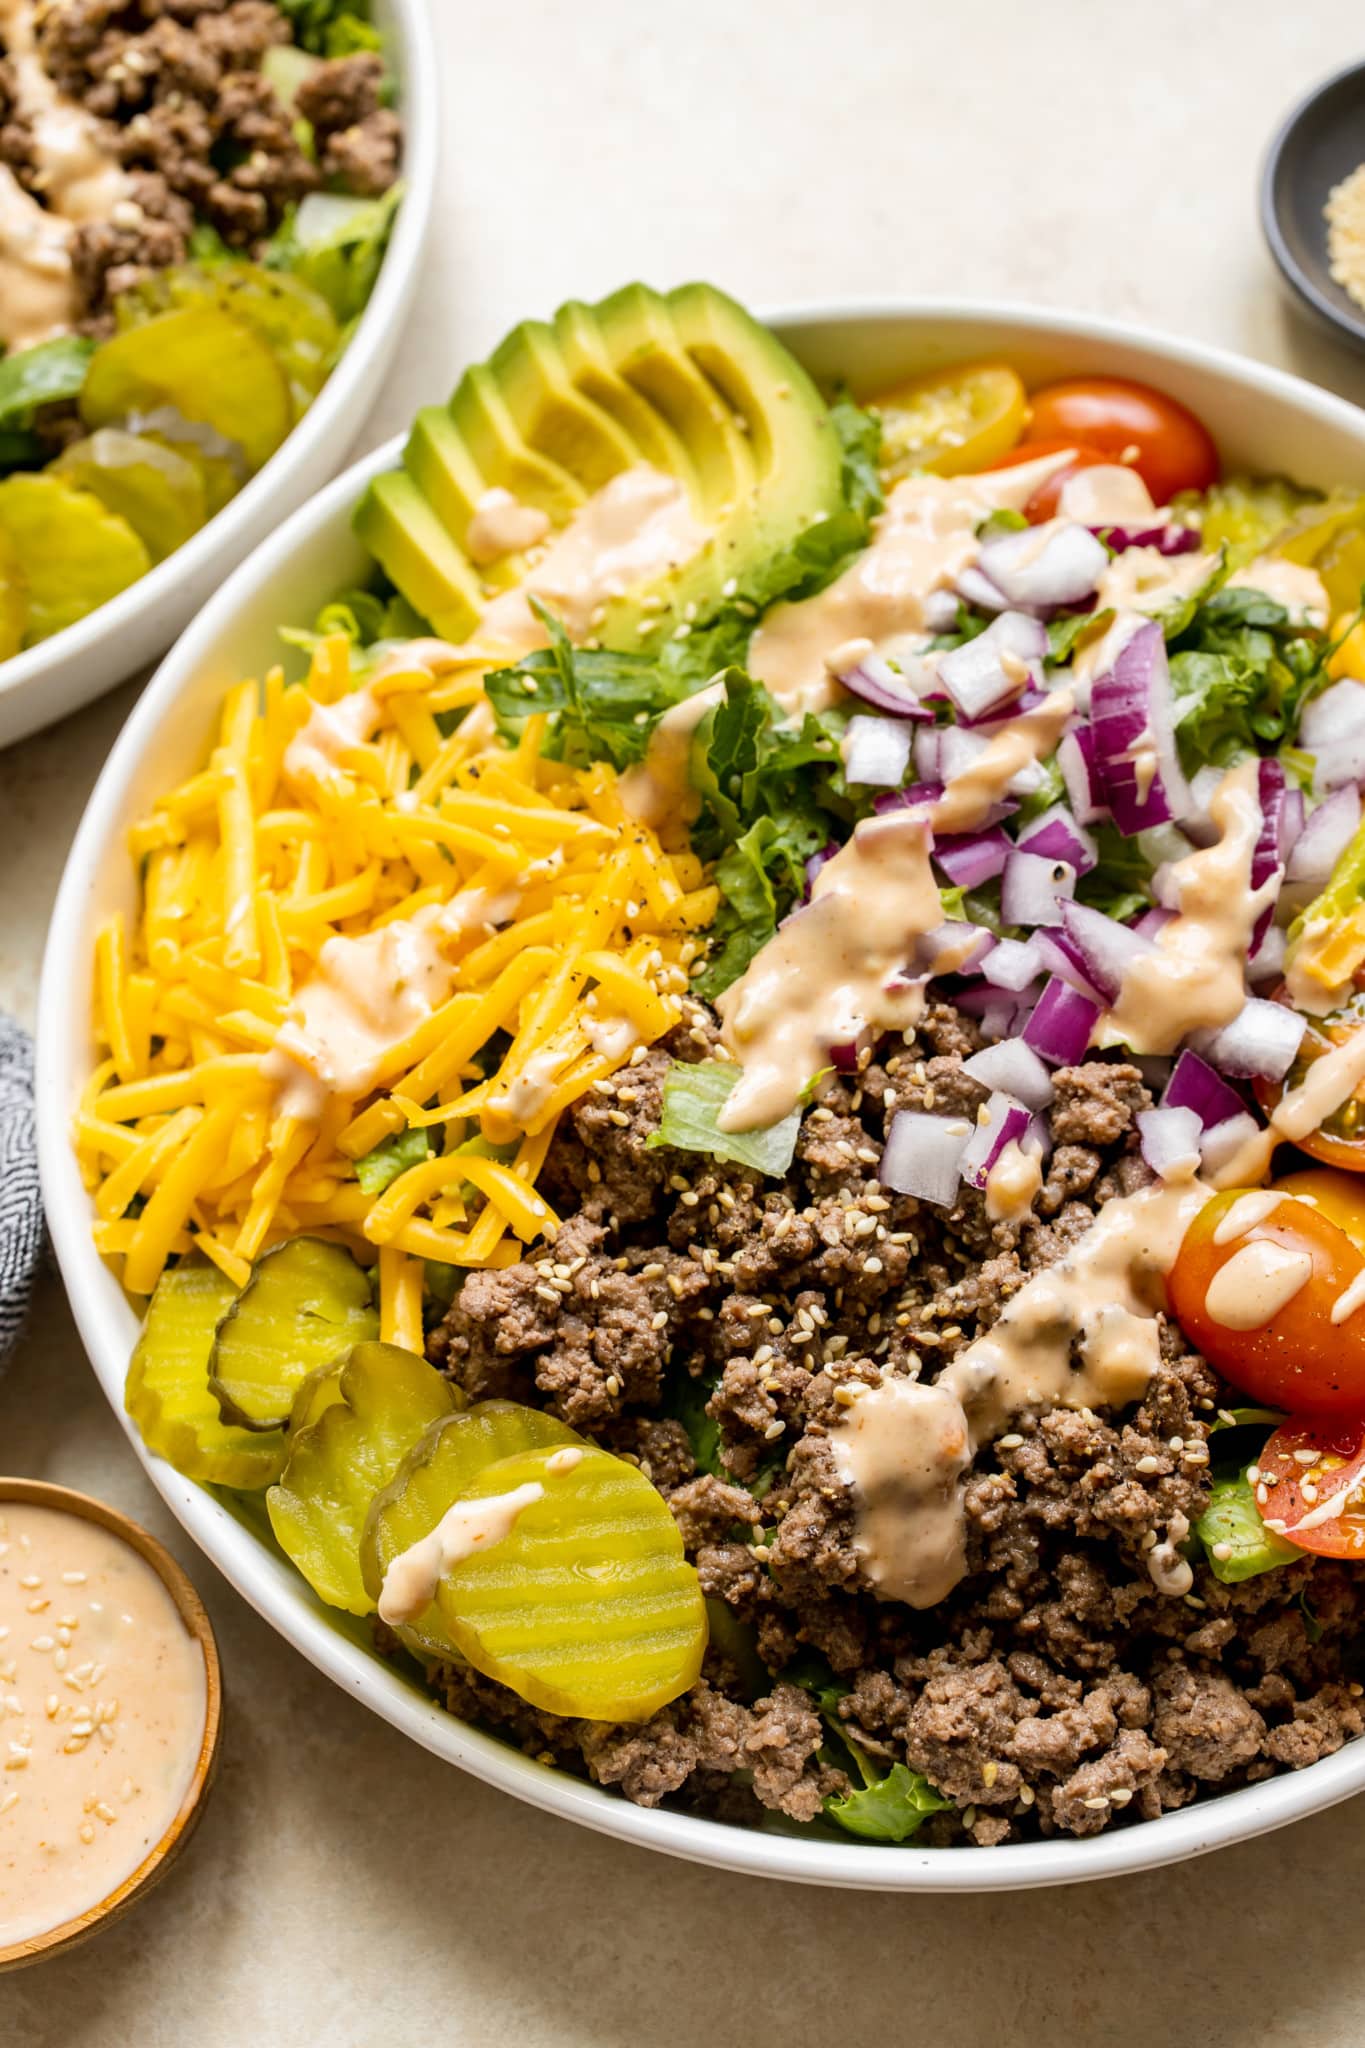 romaine lettuce in a white bowl topped with burger toppings like ground beef, cheese, avocado, red onion, pickles, tomatoes and a special burger sauce. 